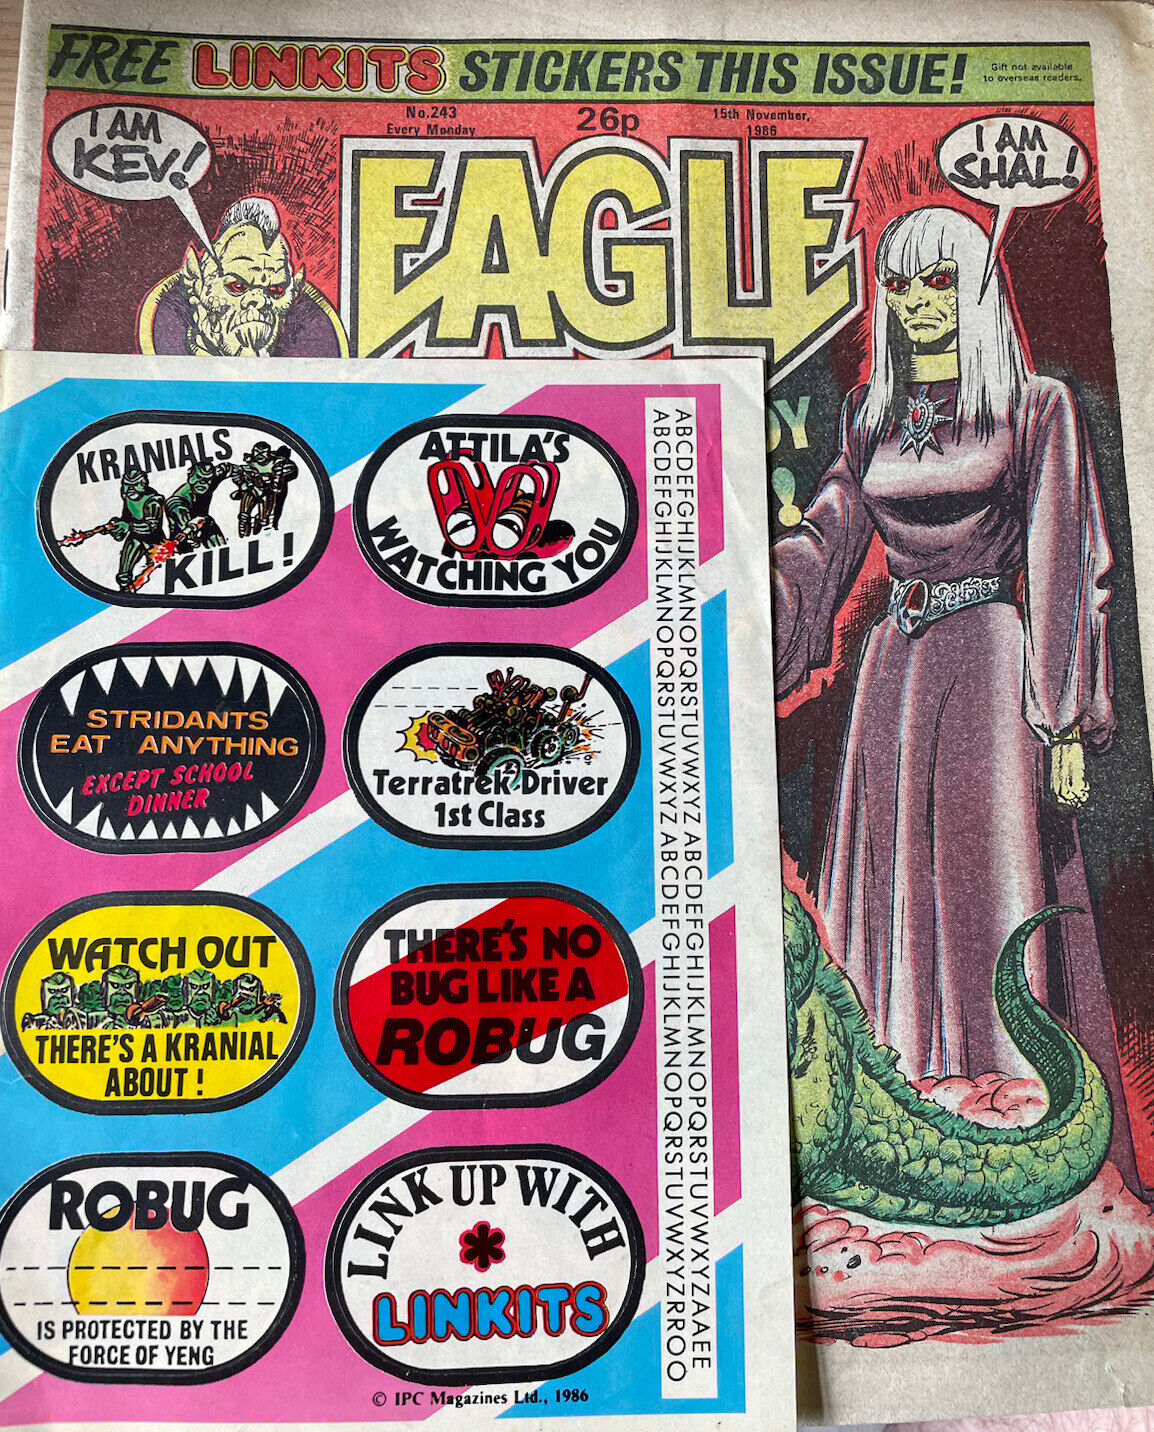 EAGLE Comic 1986 - Issue Number 243.